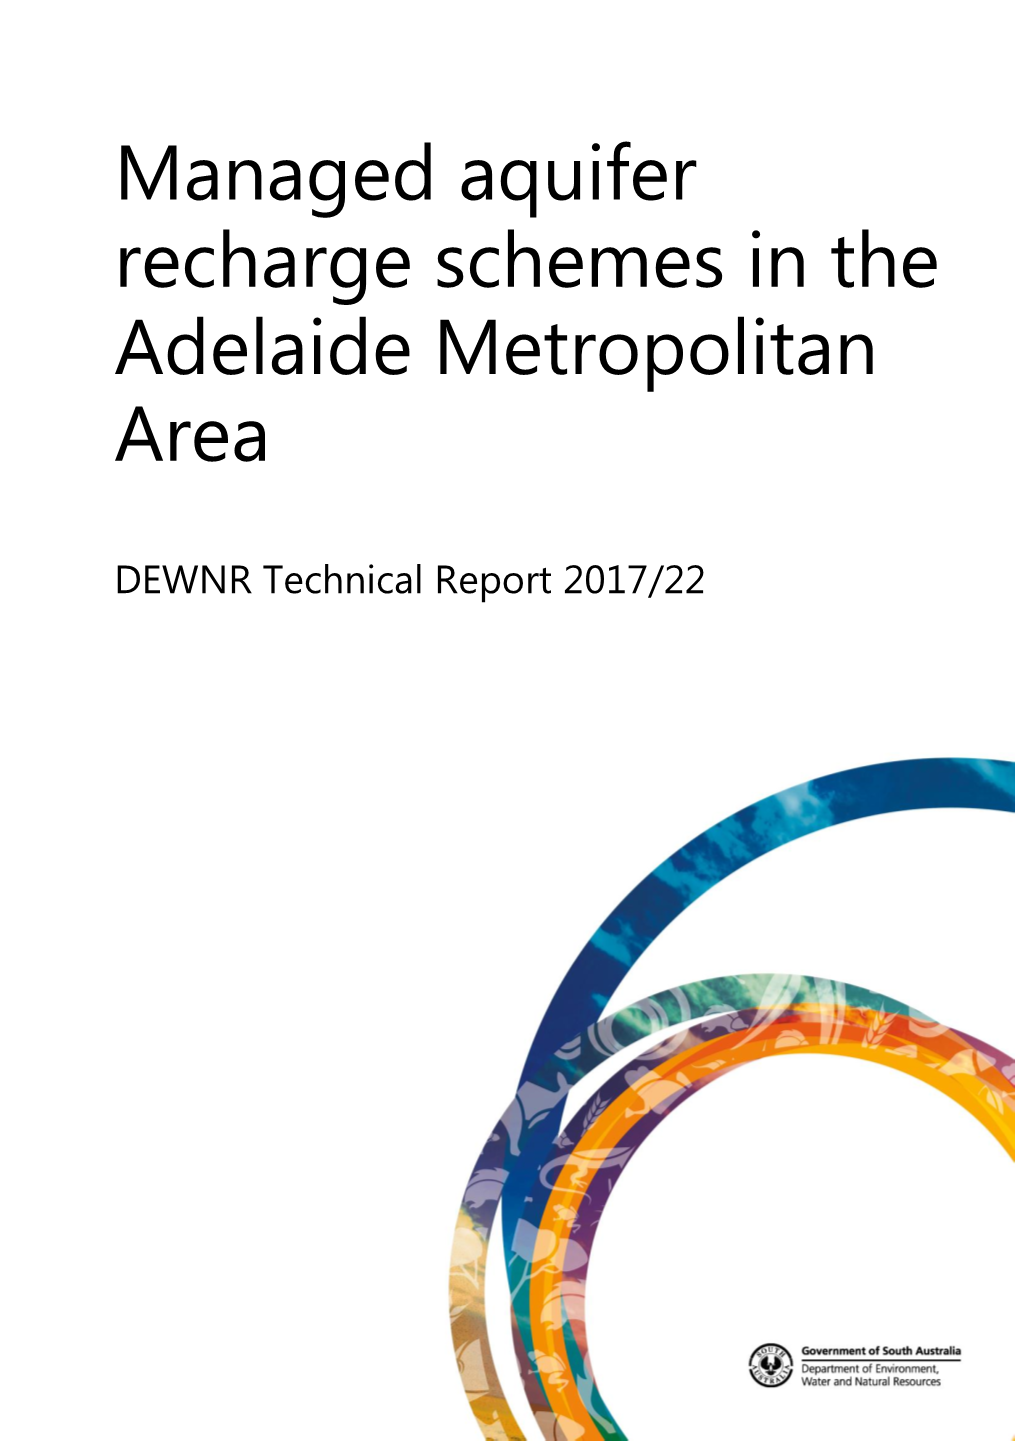 Managed Aquifer Recharge Schemes in the Adelaide Metropolitan Area